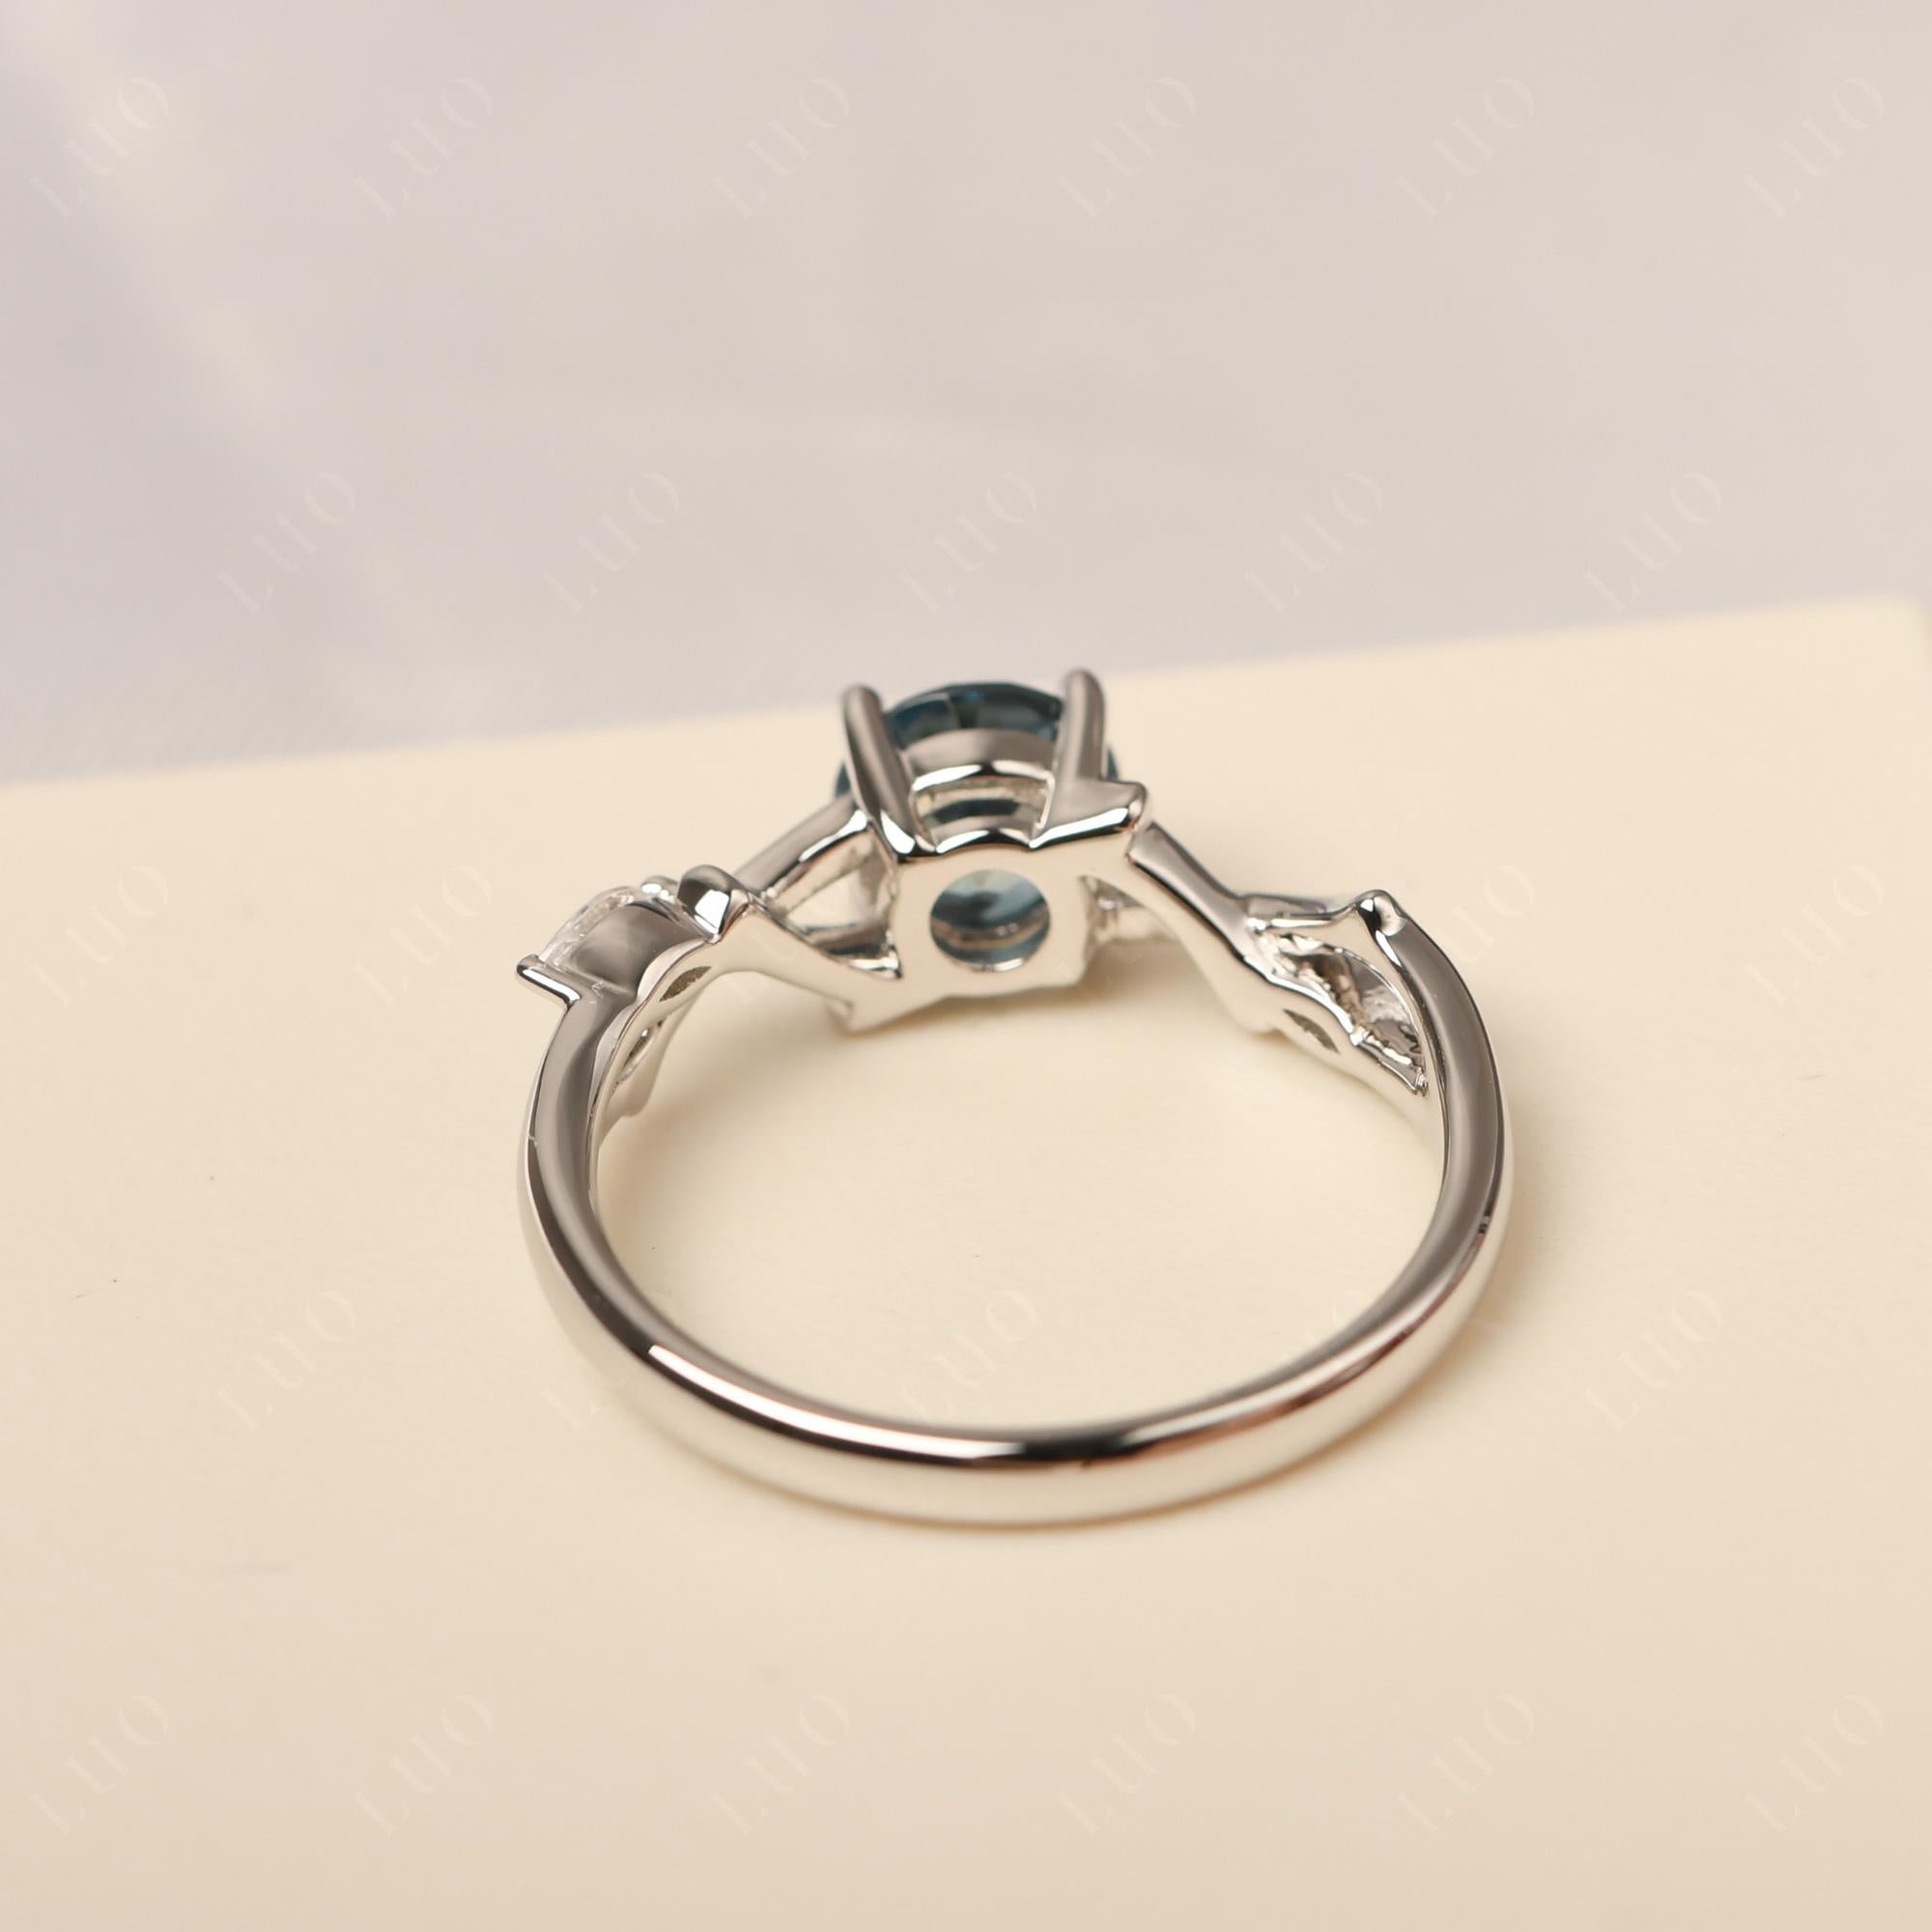 Twig London Blue Topaz Engagement Ring - LUO Jewelry